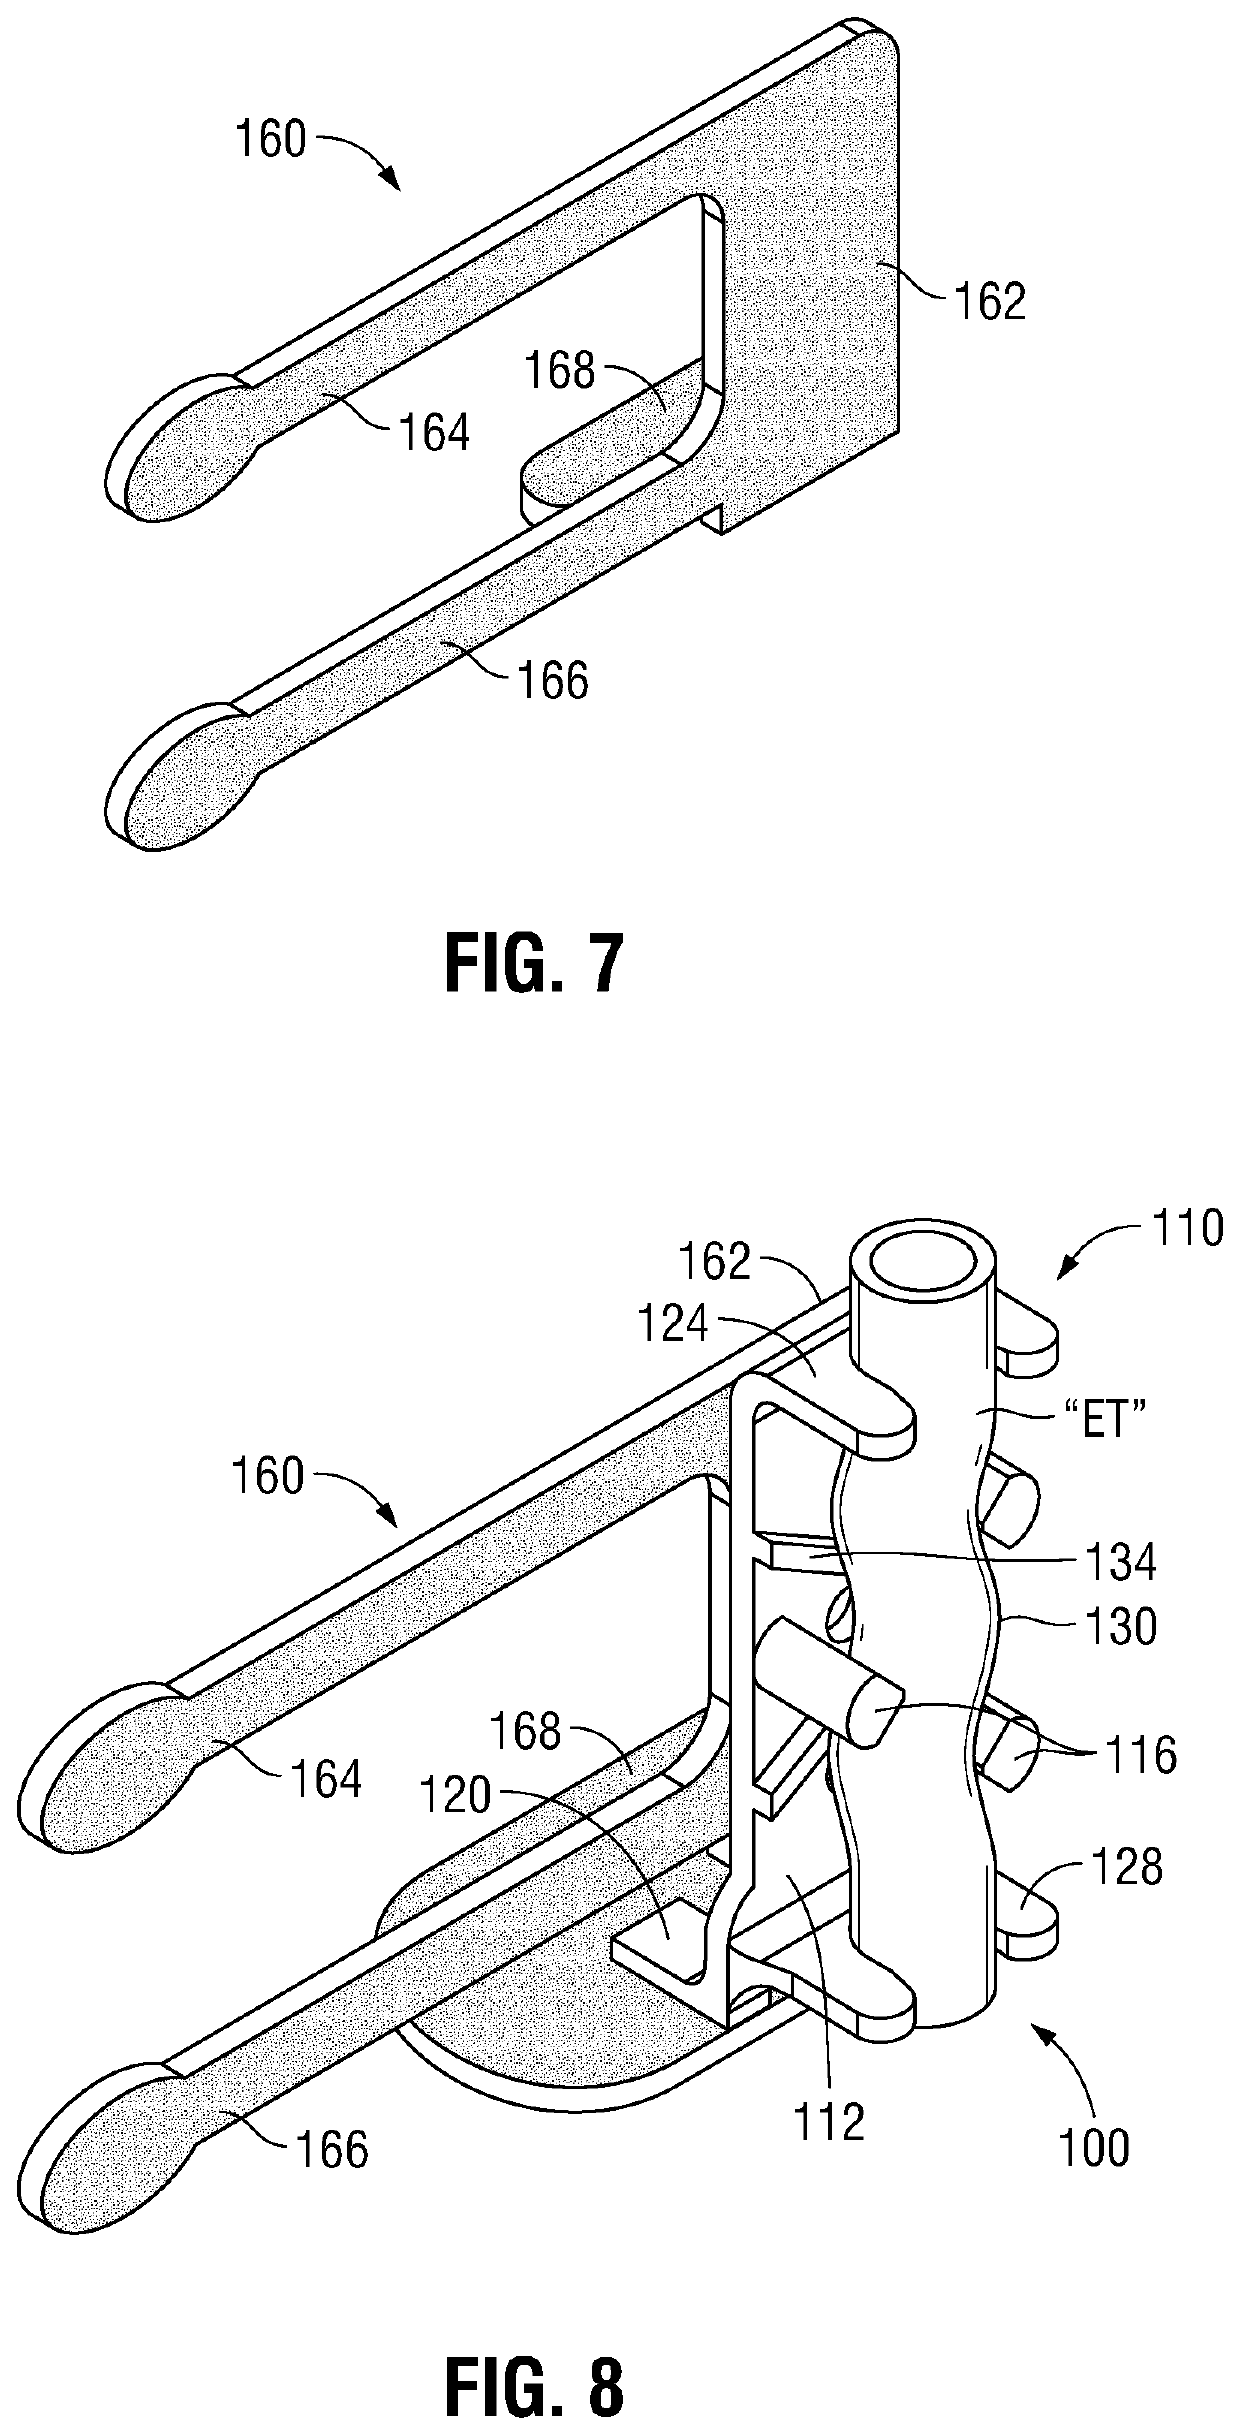 Endotracheal tube securement devices and methods